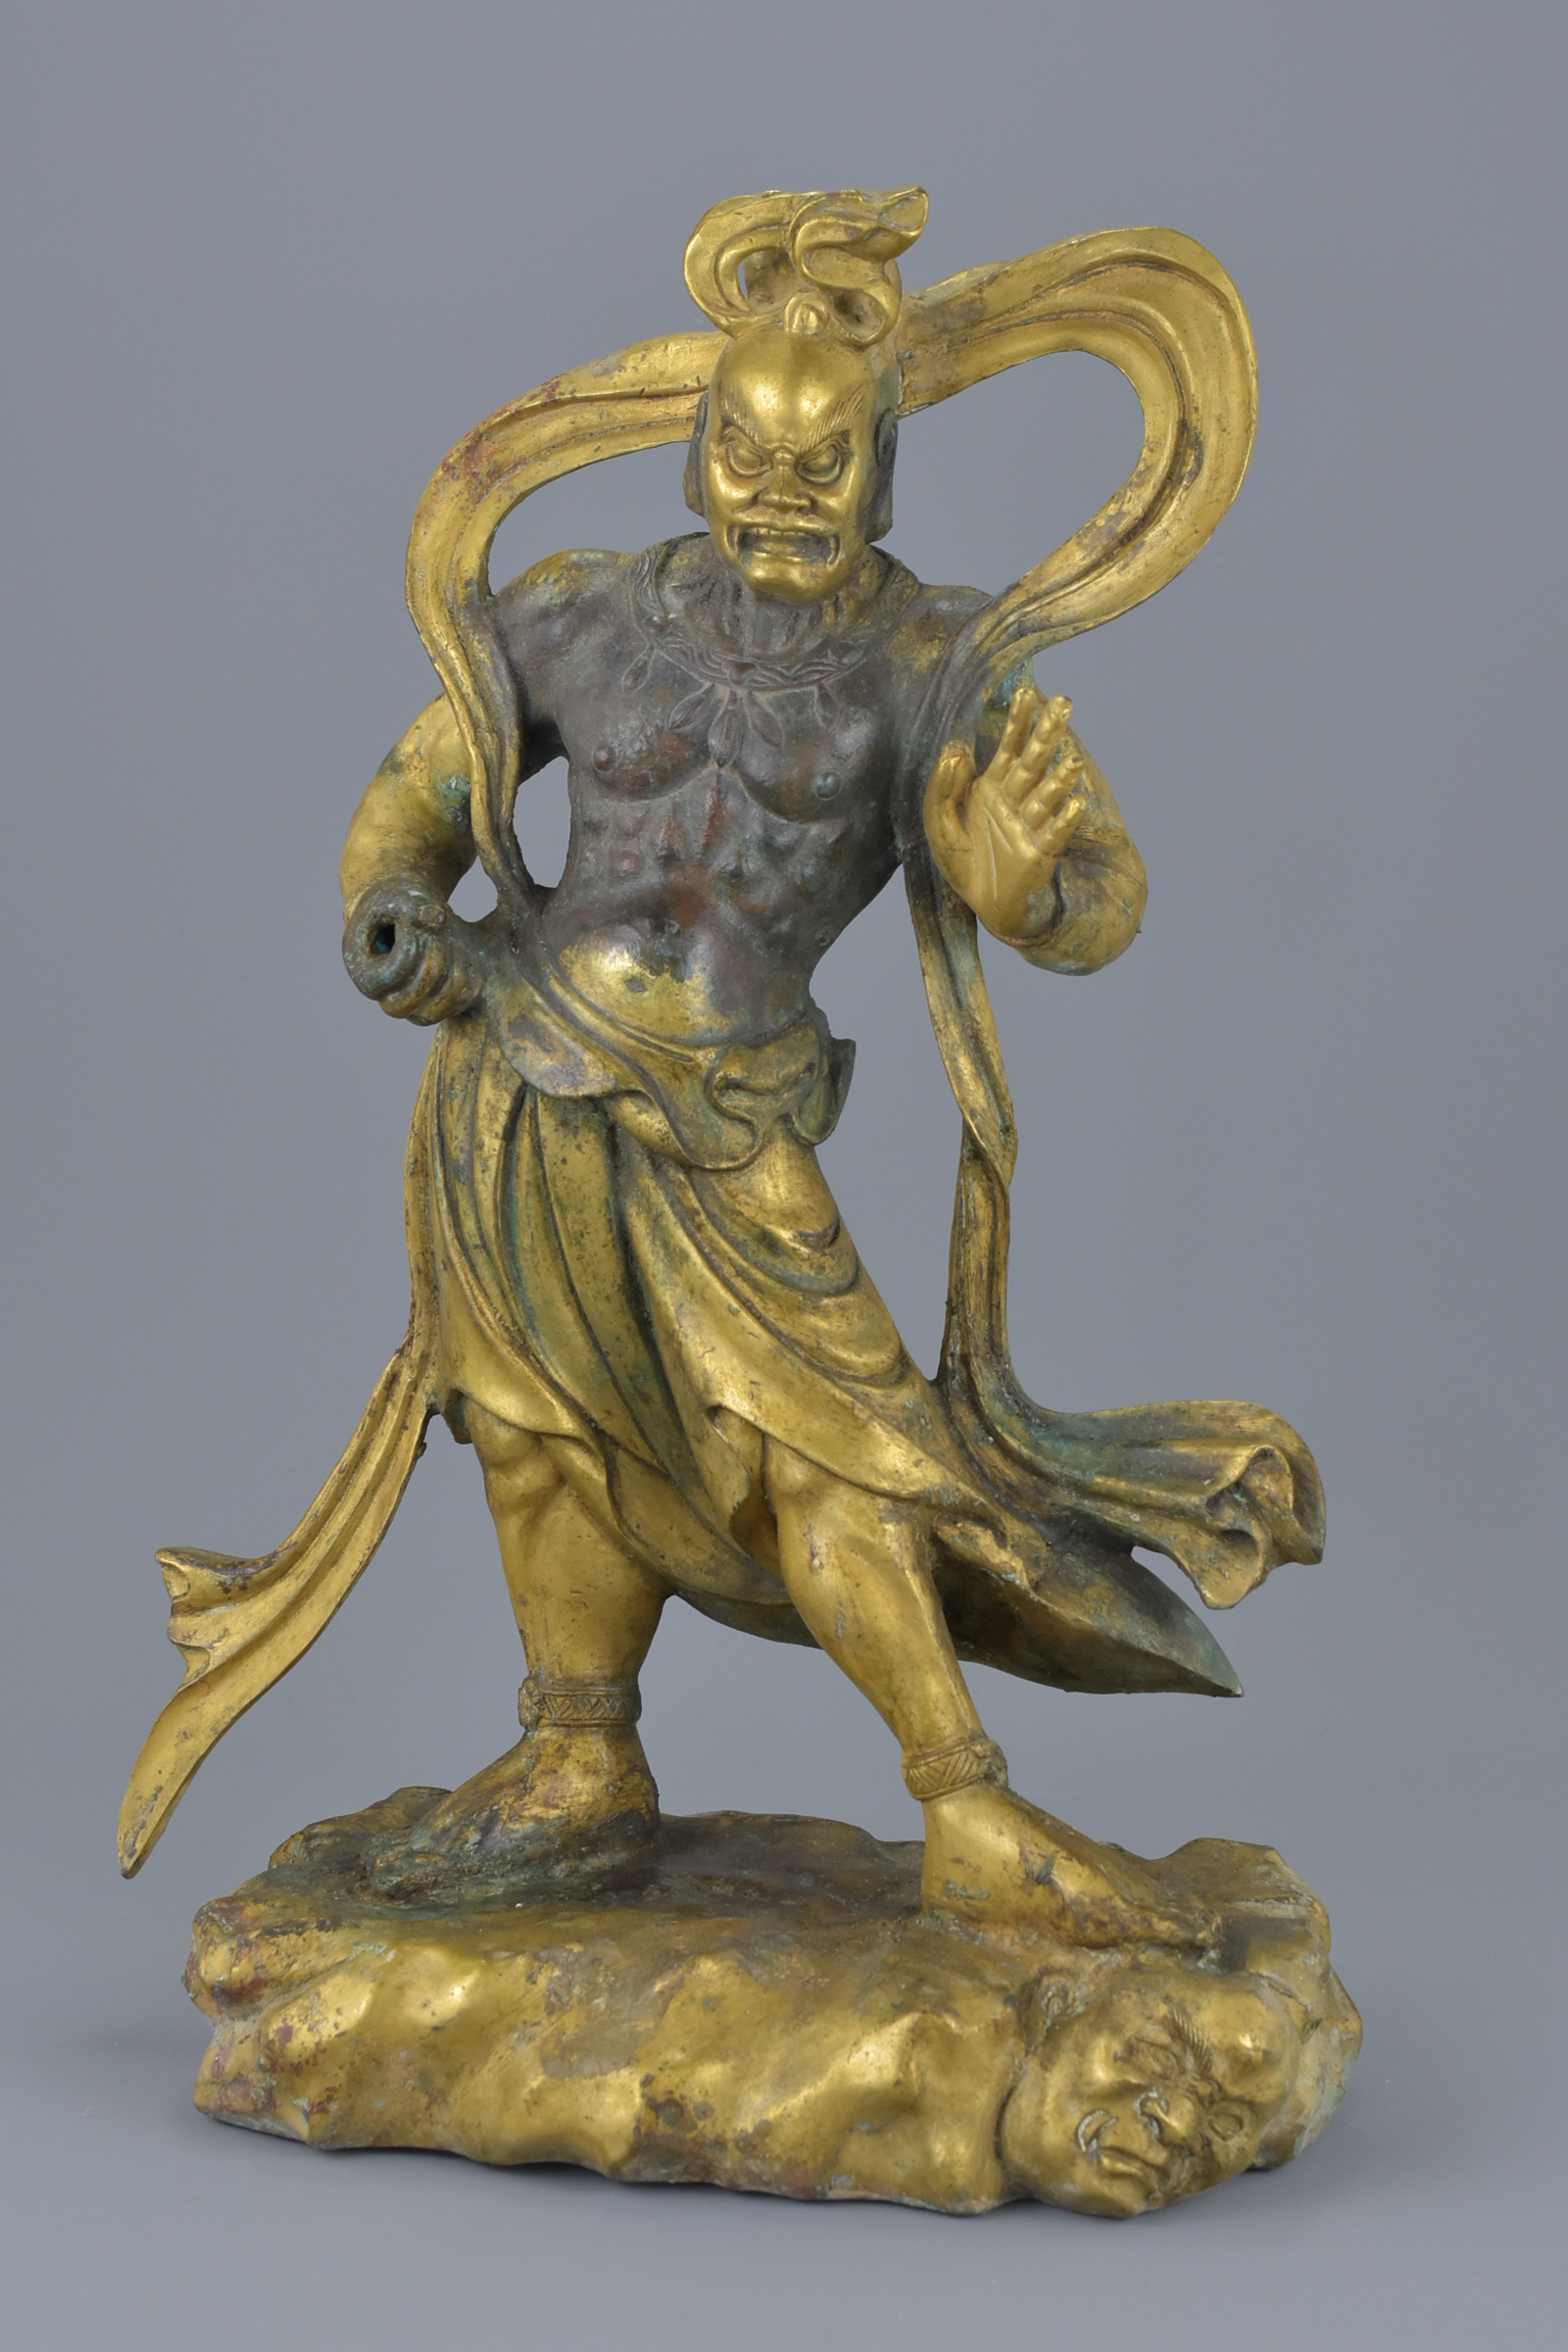 A pair of Chinese gilt bronze figures of Guardians standing on Mythical beasts. 37cm tall 4882 grams - Image 2 of 8